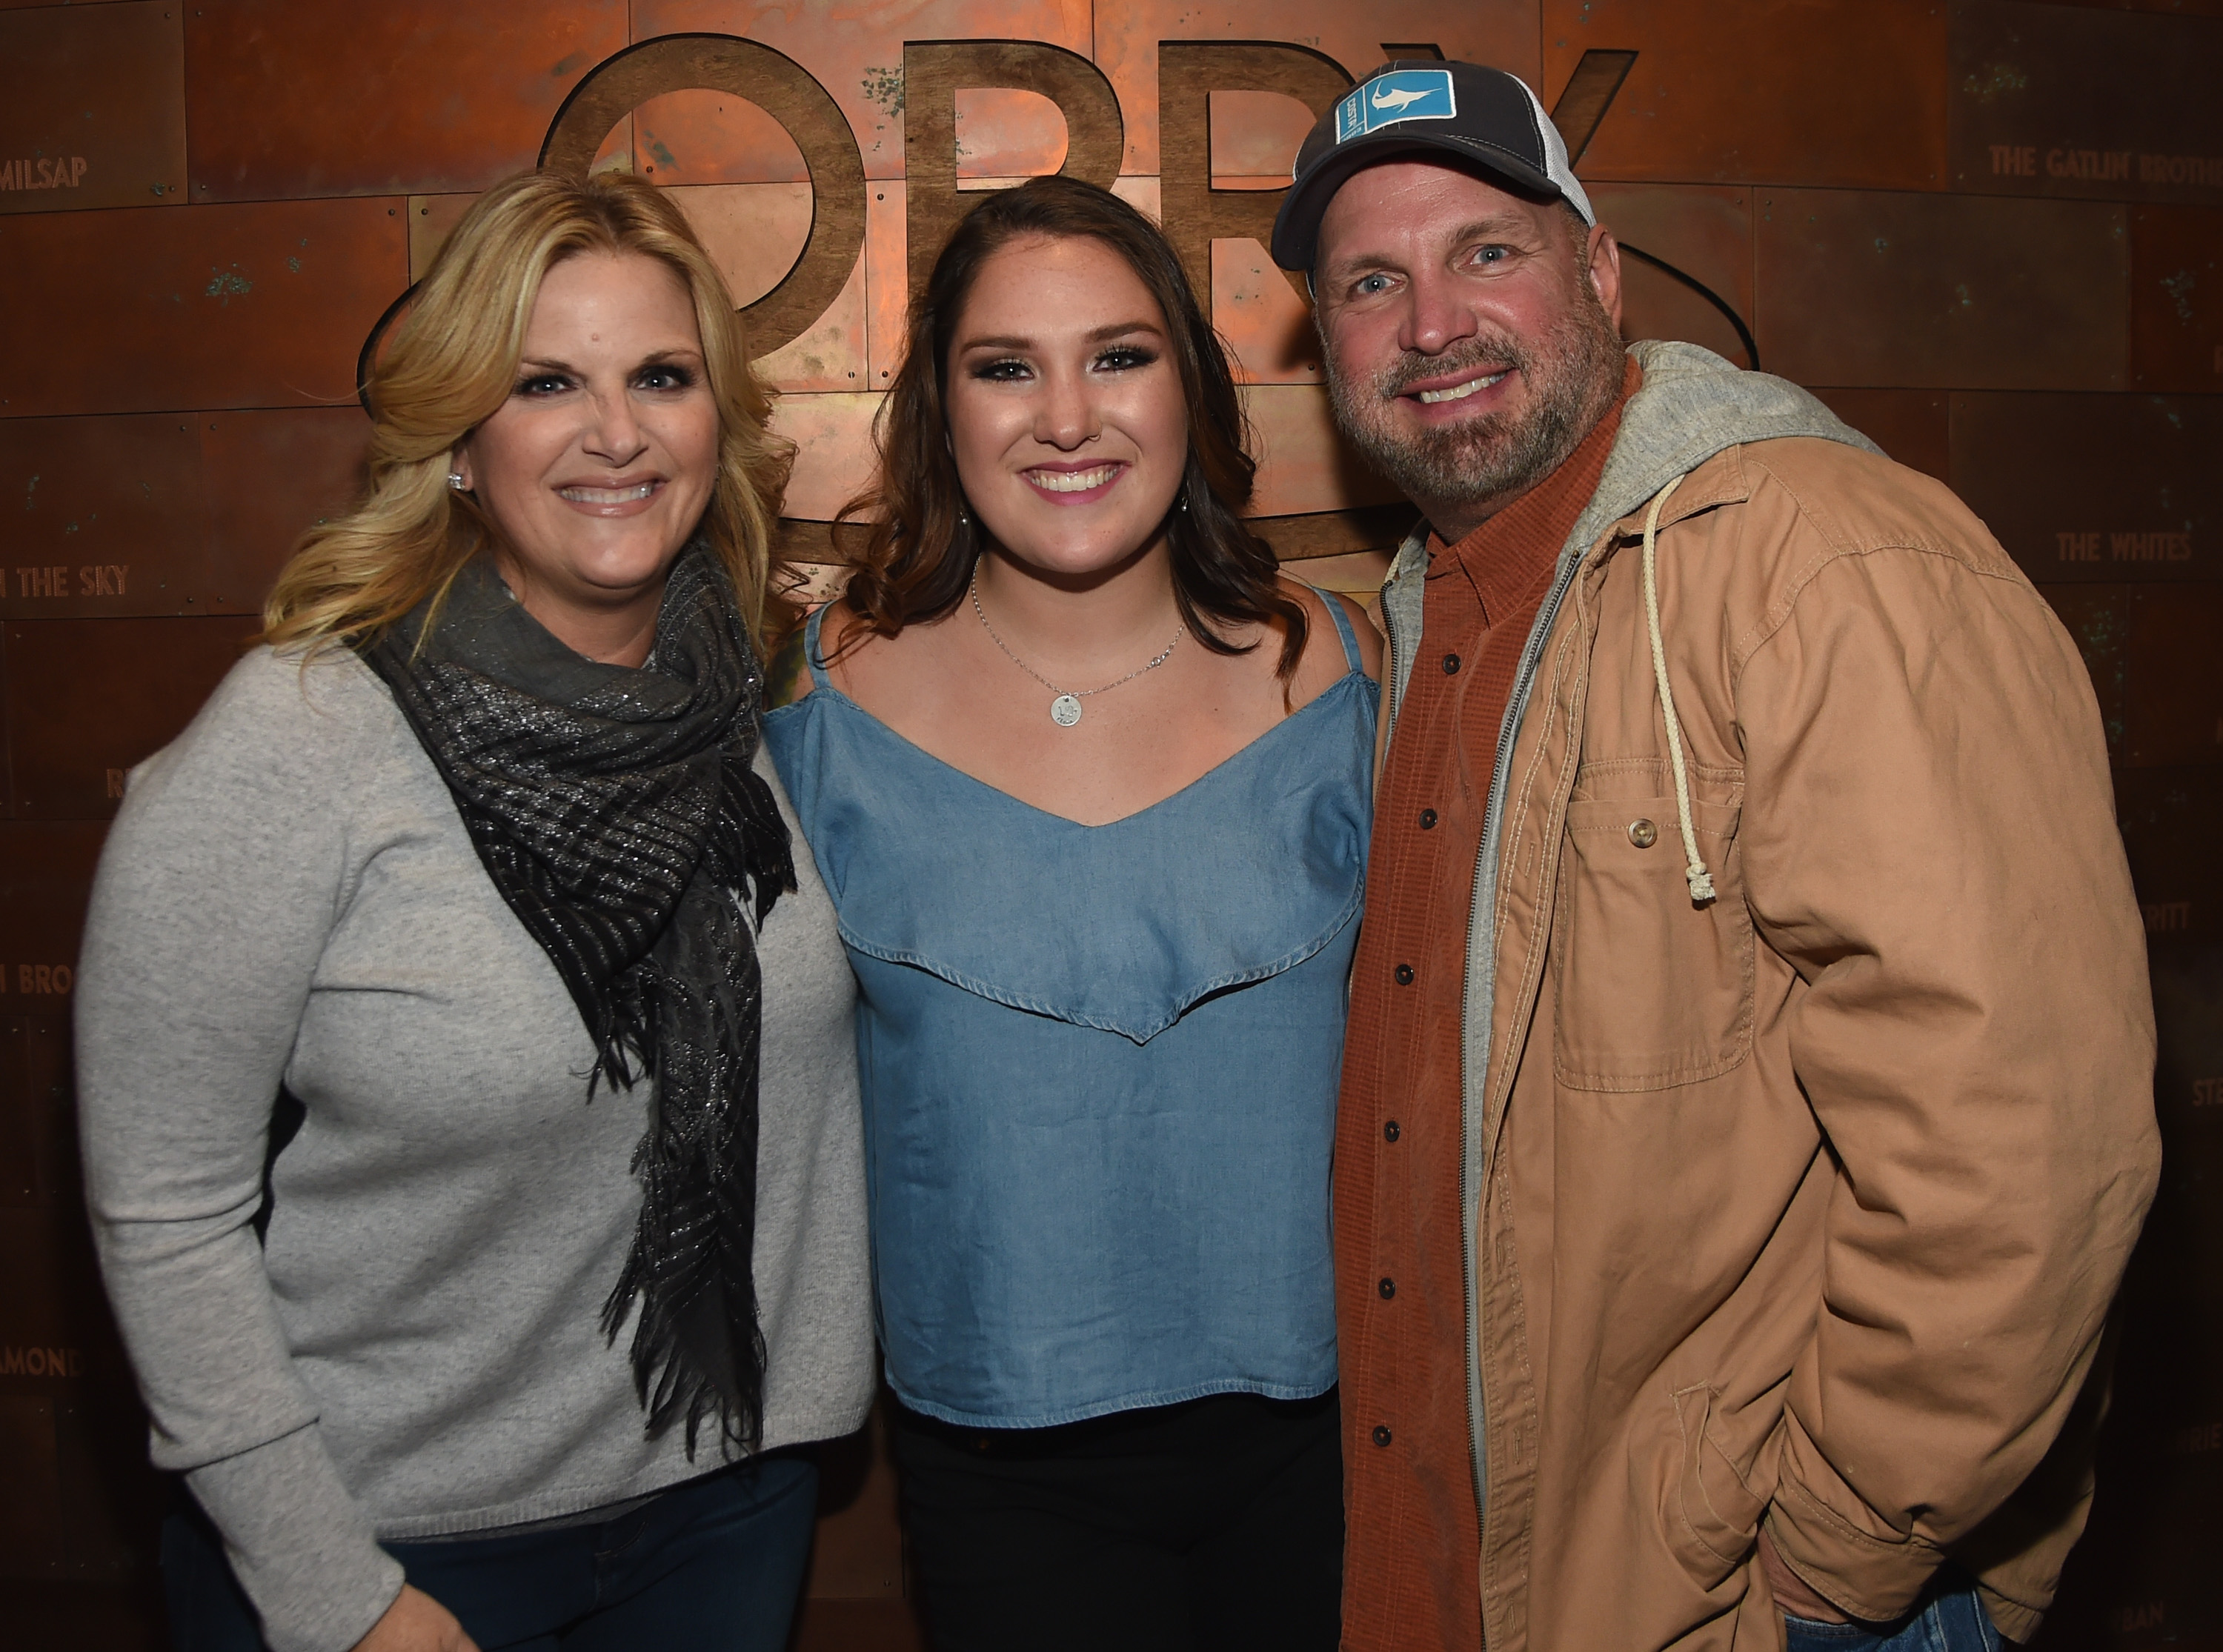 Trisha Yearwood, Allie Colleen Brooks, and Garth Brooks after Allie made her Grand Ole Opry debut during Dr. Ralph Stanley Forever: A Special Tribute Concert in Nashville, Tennessee, on October 19, 2017. | Source: Getty Images